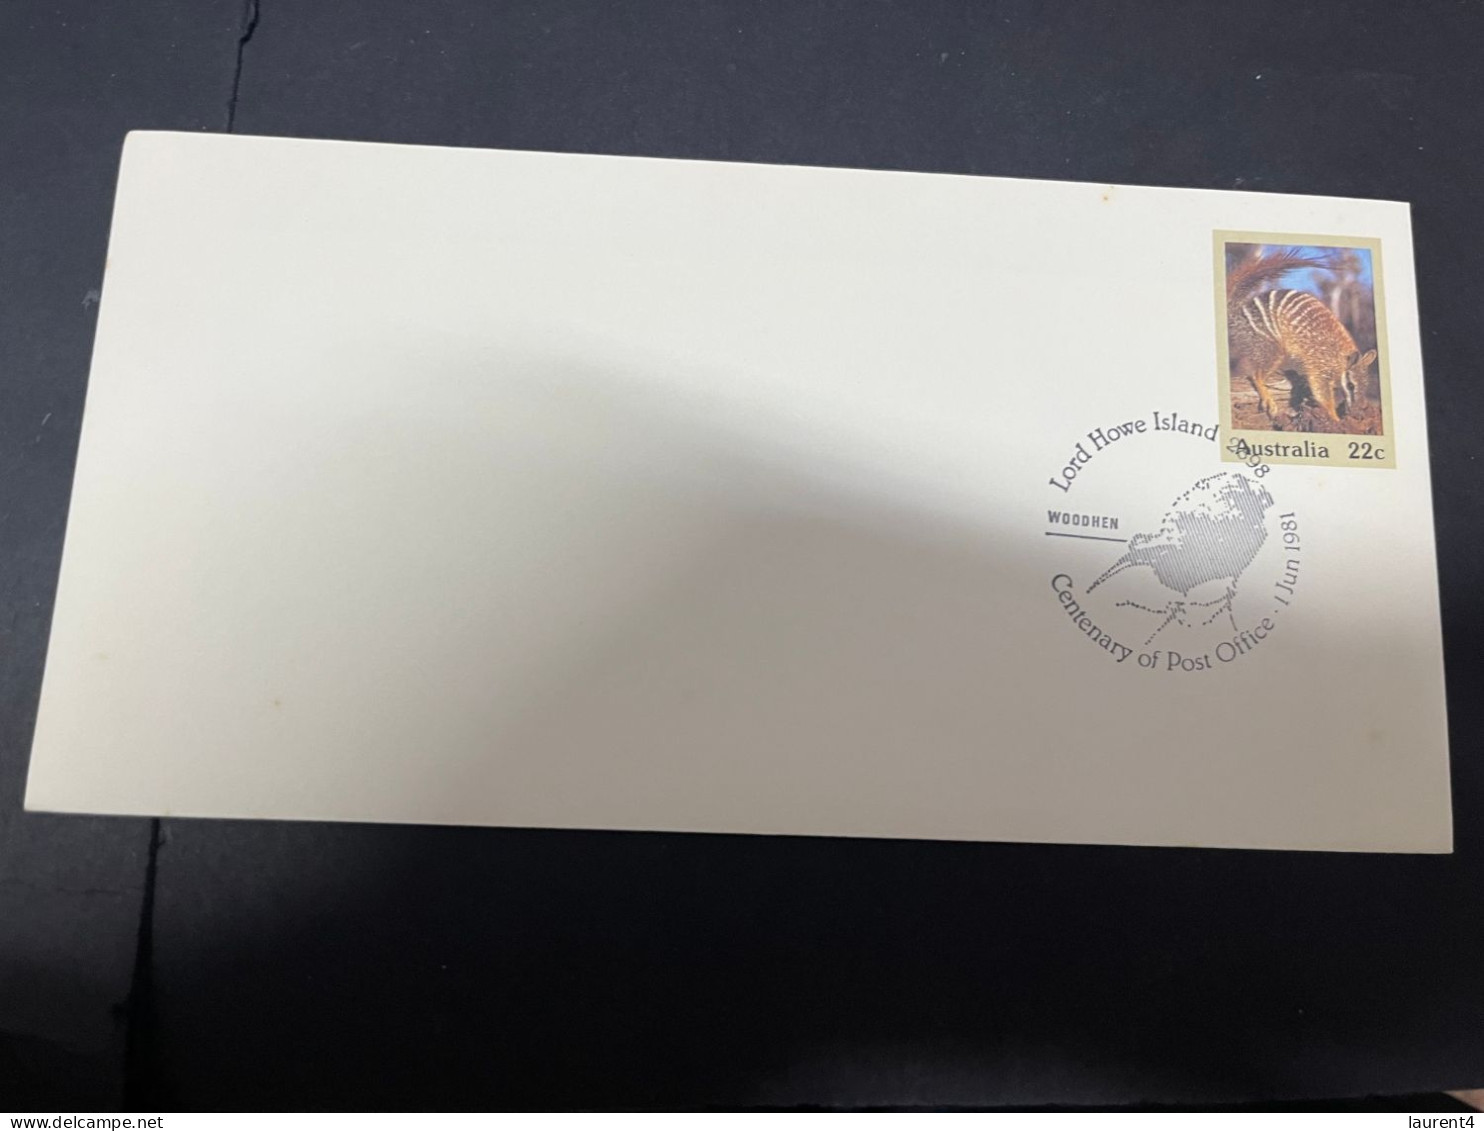 26-4-2024 (3 Z 9) Australia FDC - 1981 - Lord Howe Island - Wooden (special P/m) 2 Animal Covers - Premiers Jours (FDC)